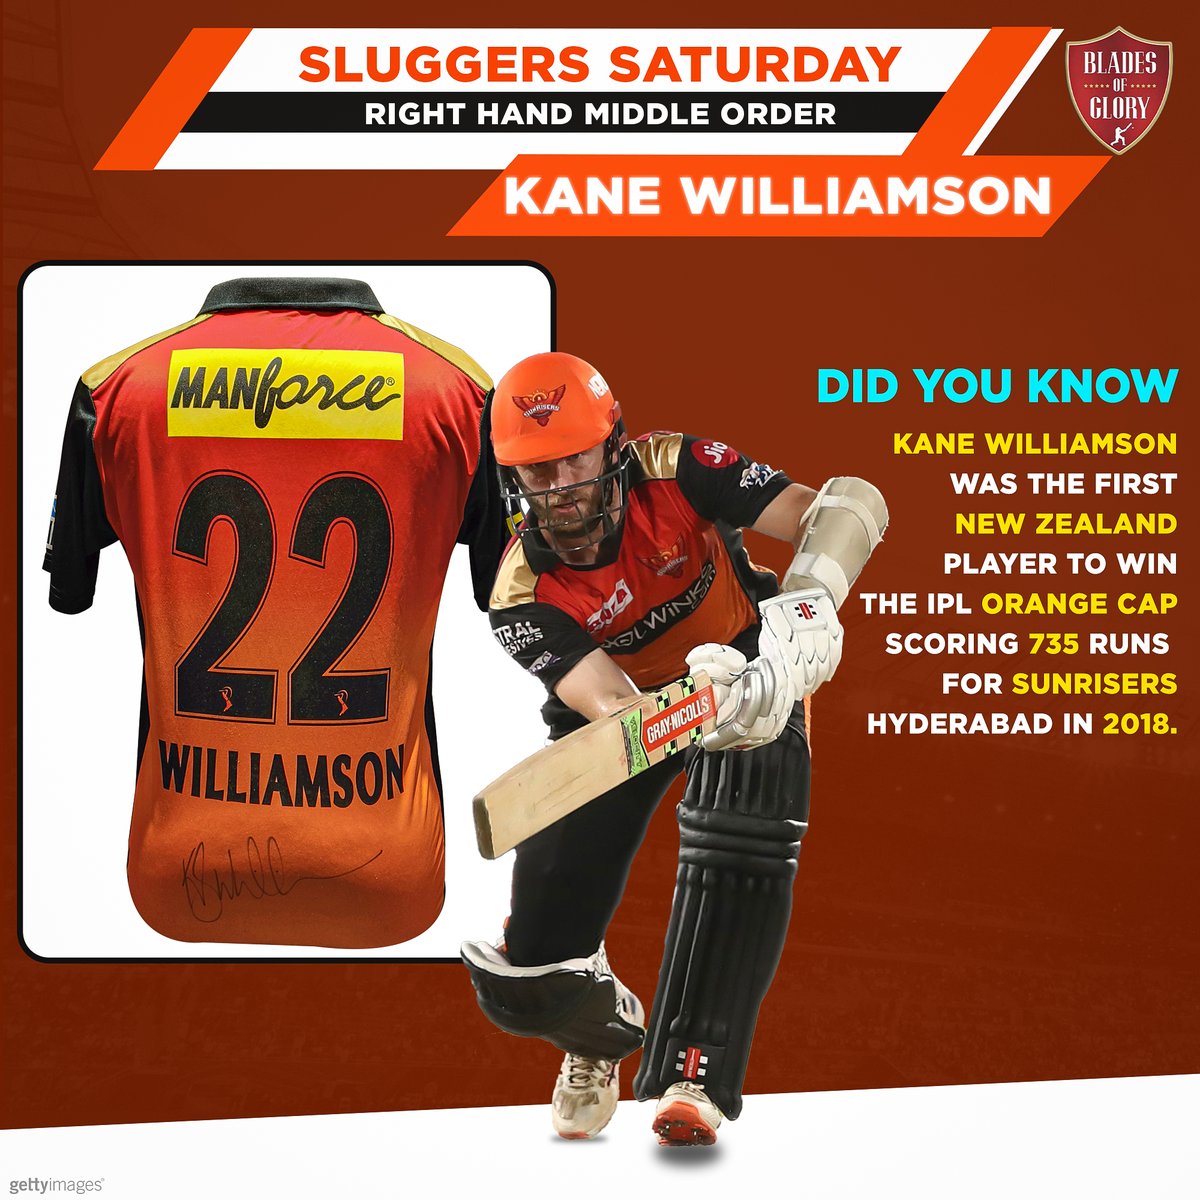 Did you know?
Kane Williamson made history by clinching the IPL orange cap with 735 runs for Sunrisers Hyderabad in 2018!

Witness this legendary jersey in our museum. 🌟🔶
.

#SRH #KaneWiiliamson #NewZealand #IPL #cricketmuseum #cricketmemorabilia #bladesofglory